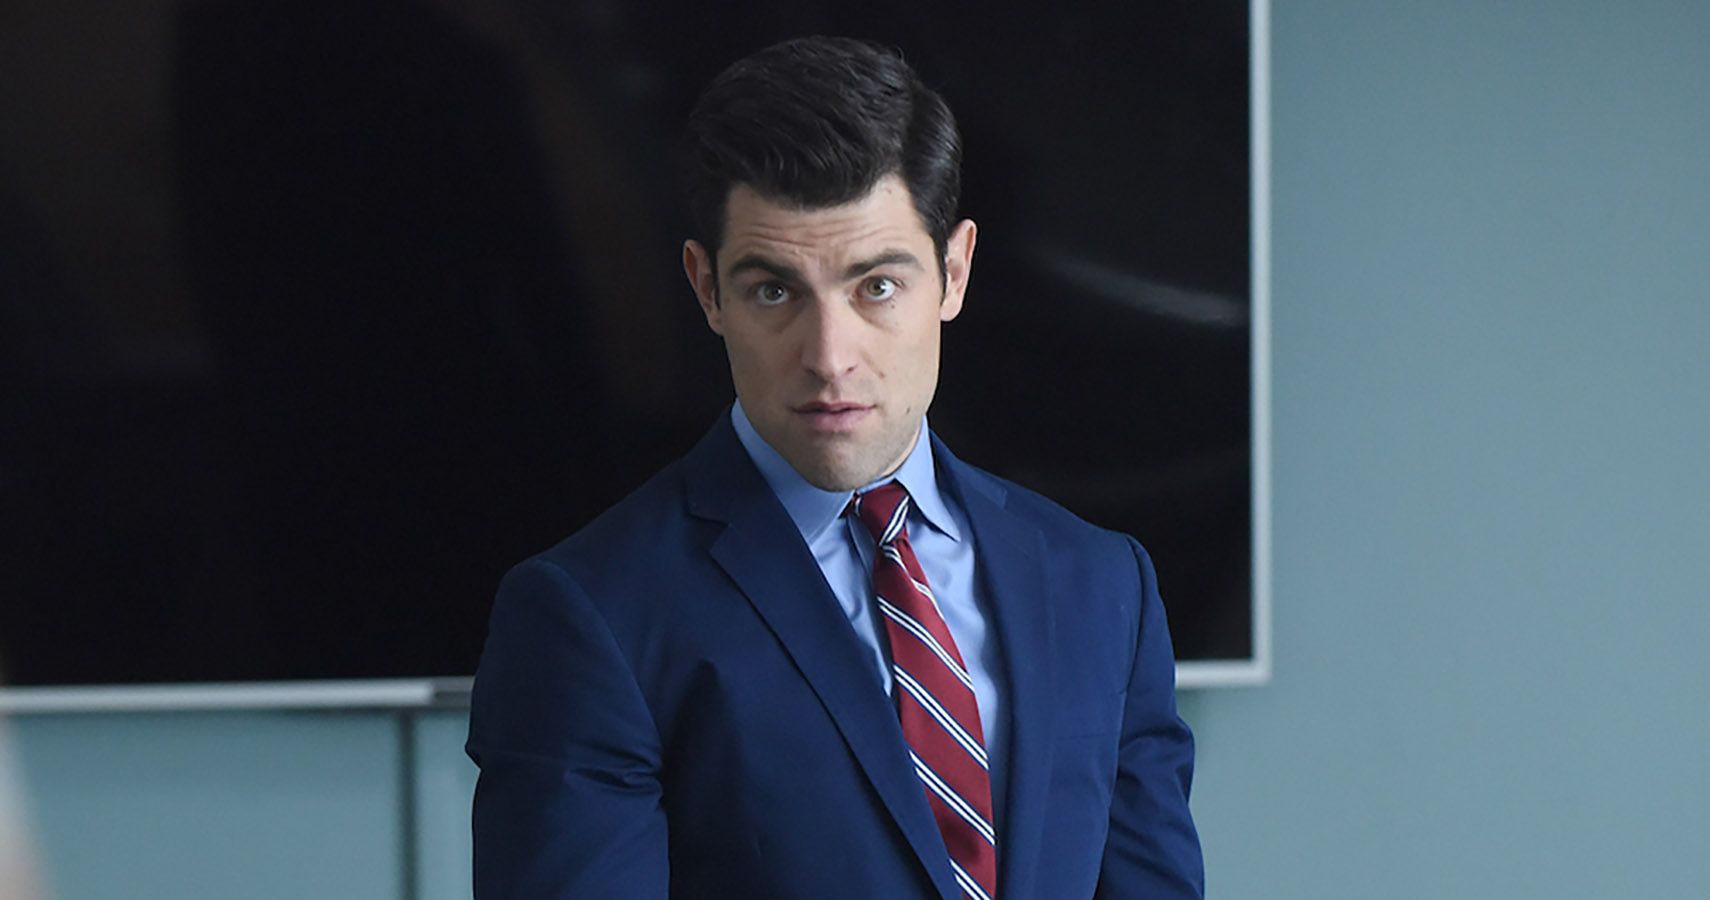 max greenfield toy